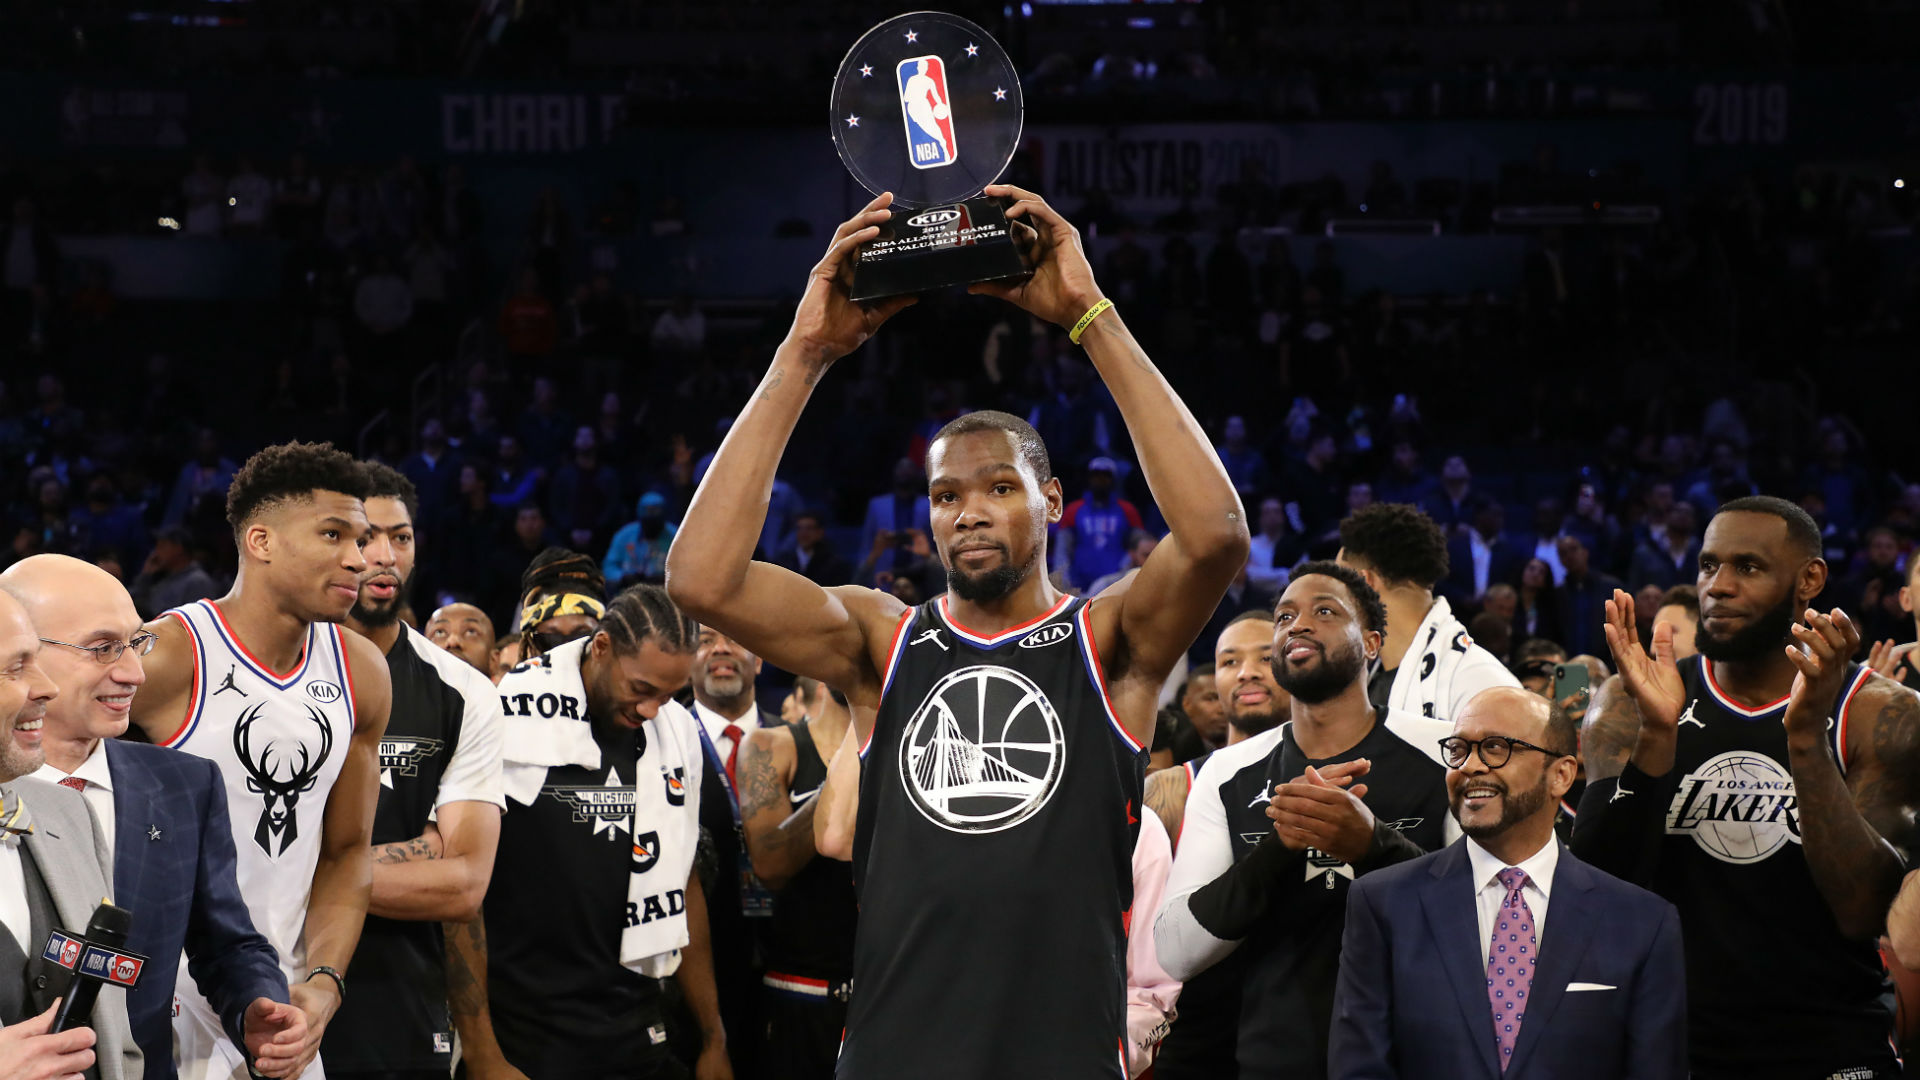 Named the NBA All-Star Game's MVP for a second time, Kevin Durant said to do so in front of his friends and family was "pretty sweet".